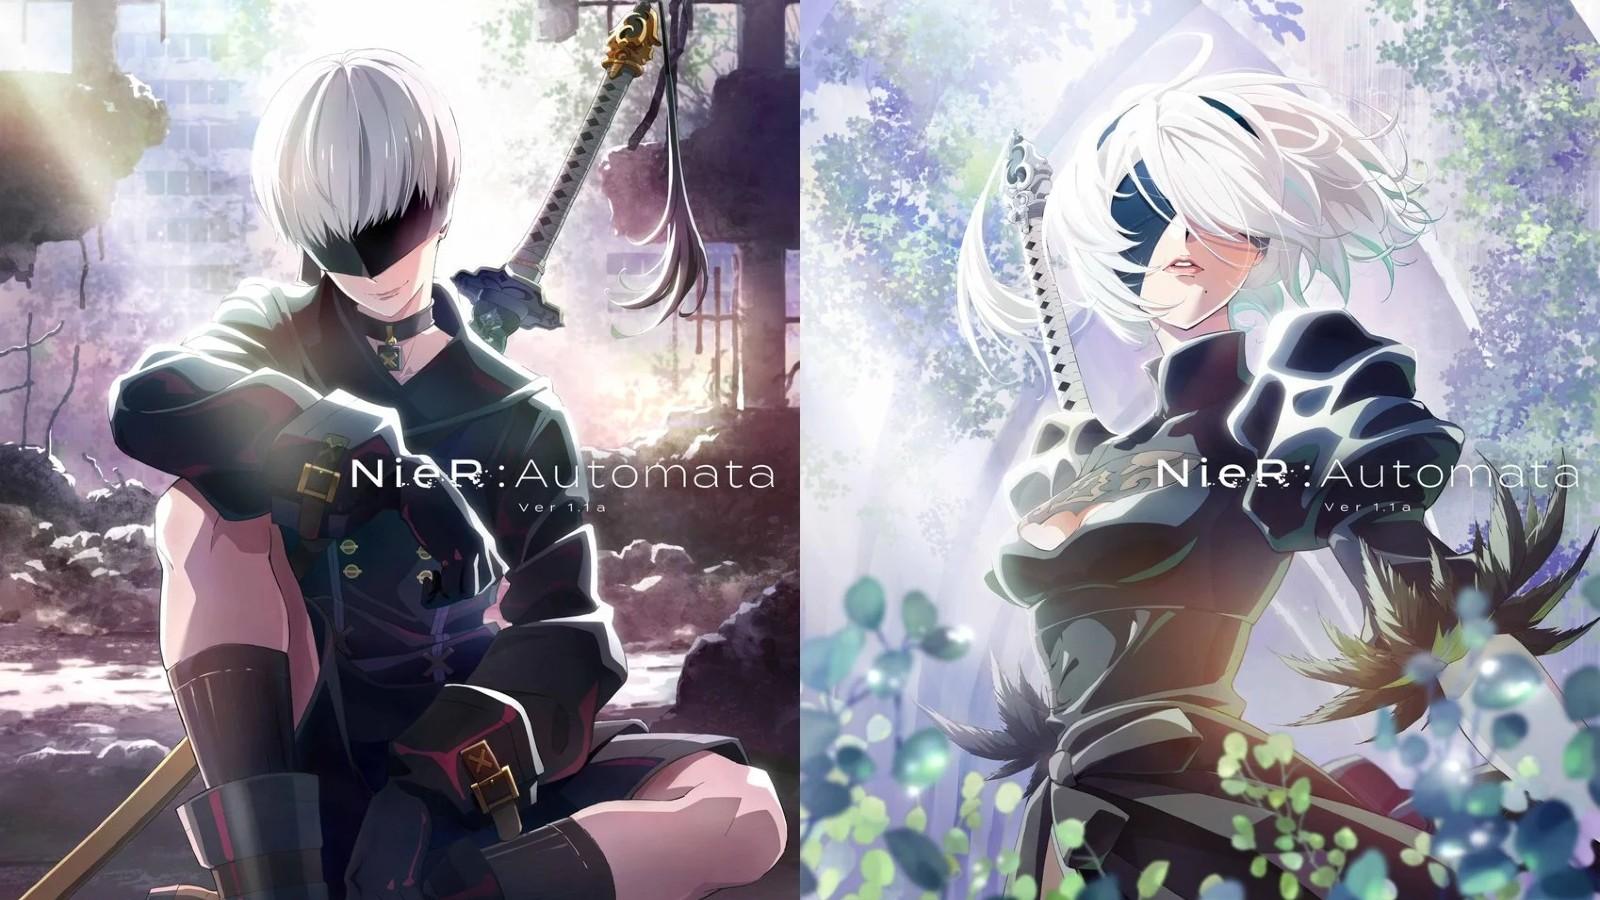 Official promotional images from the Nier Automata Ver 1.1a anime.